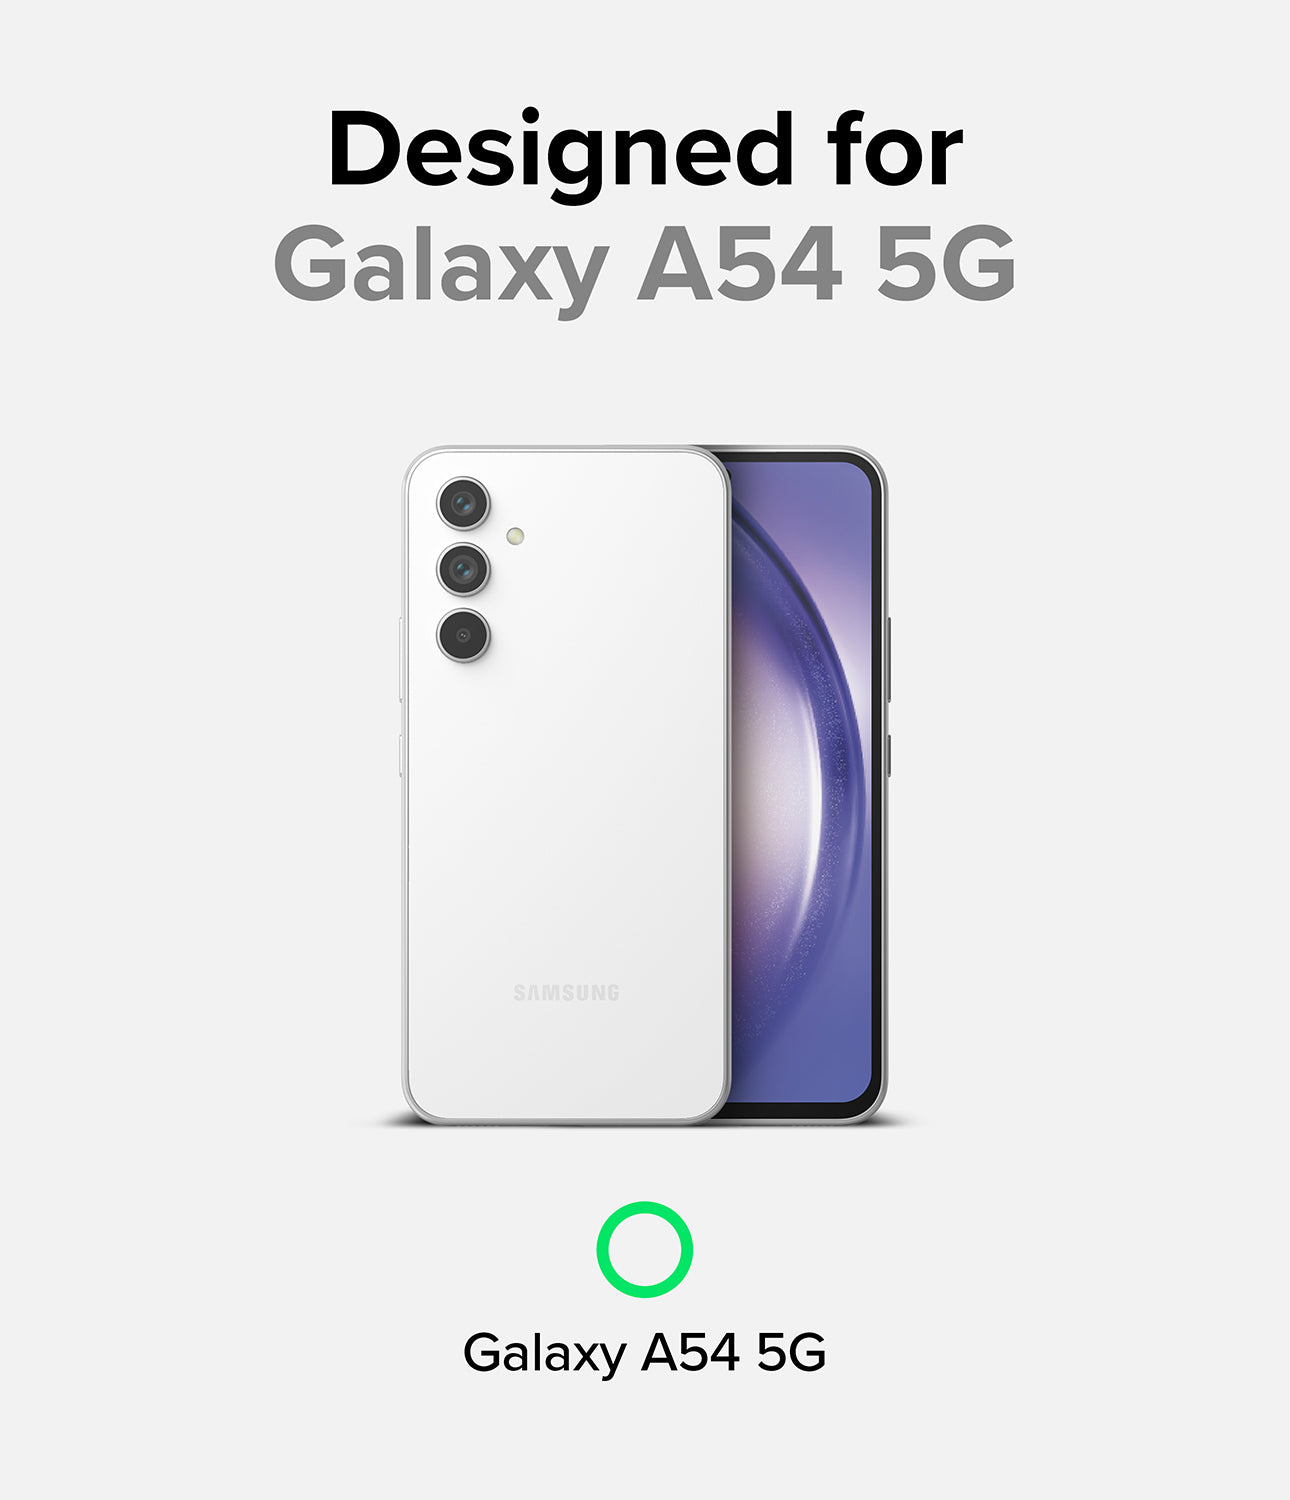 Designed for Galaxy A54 5G